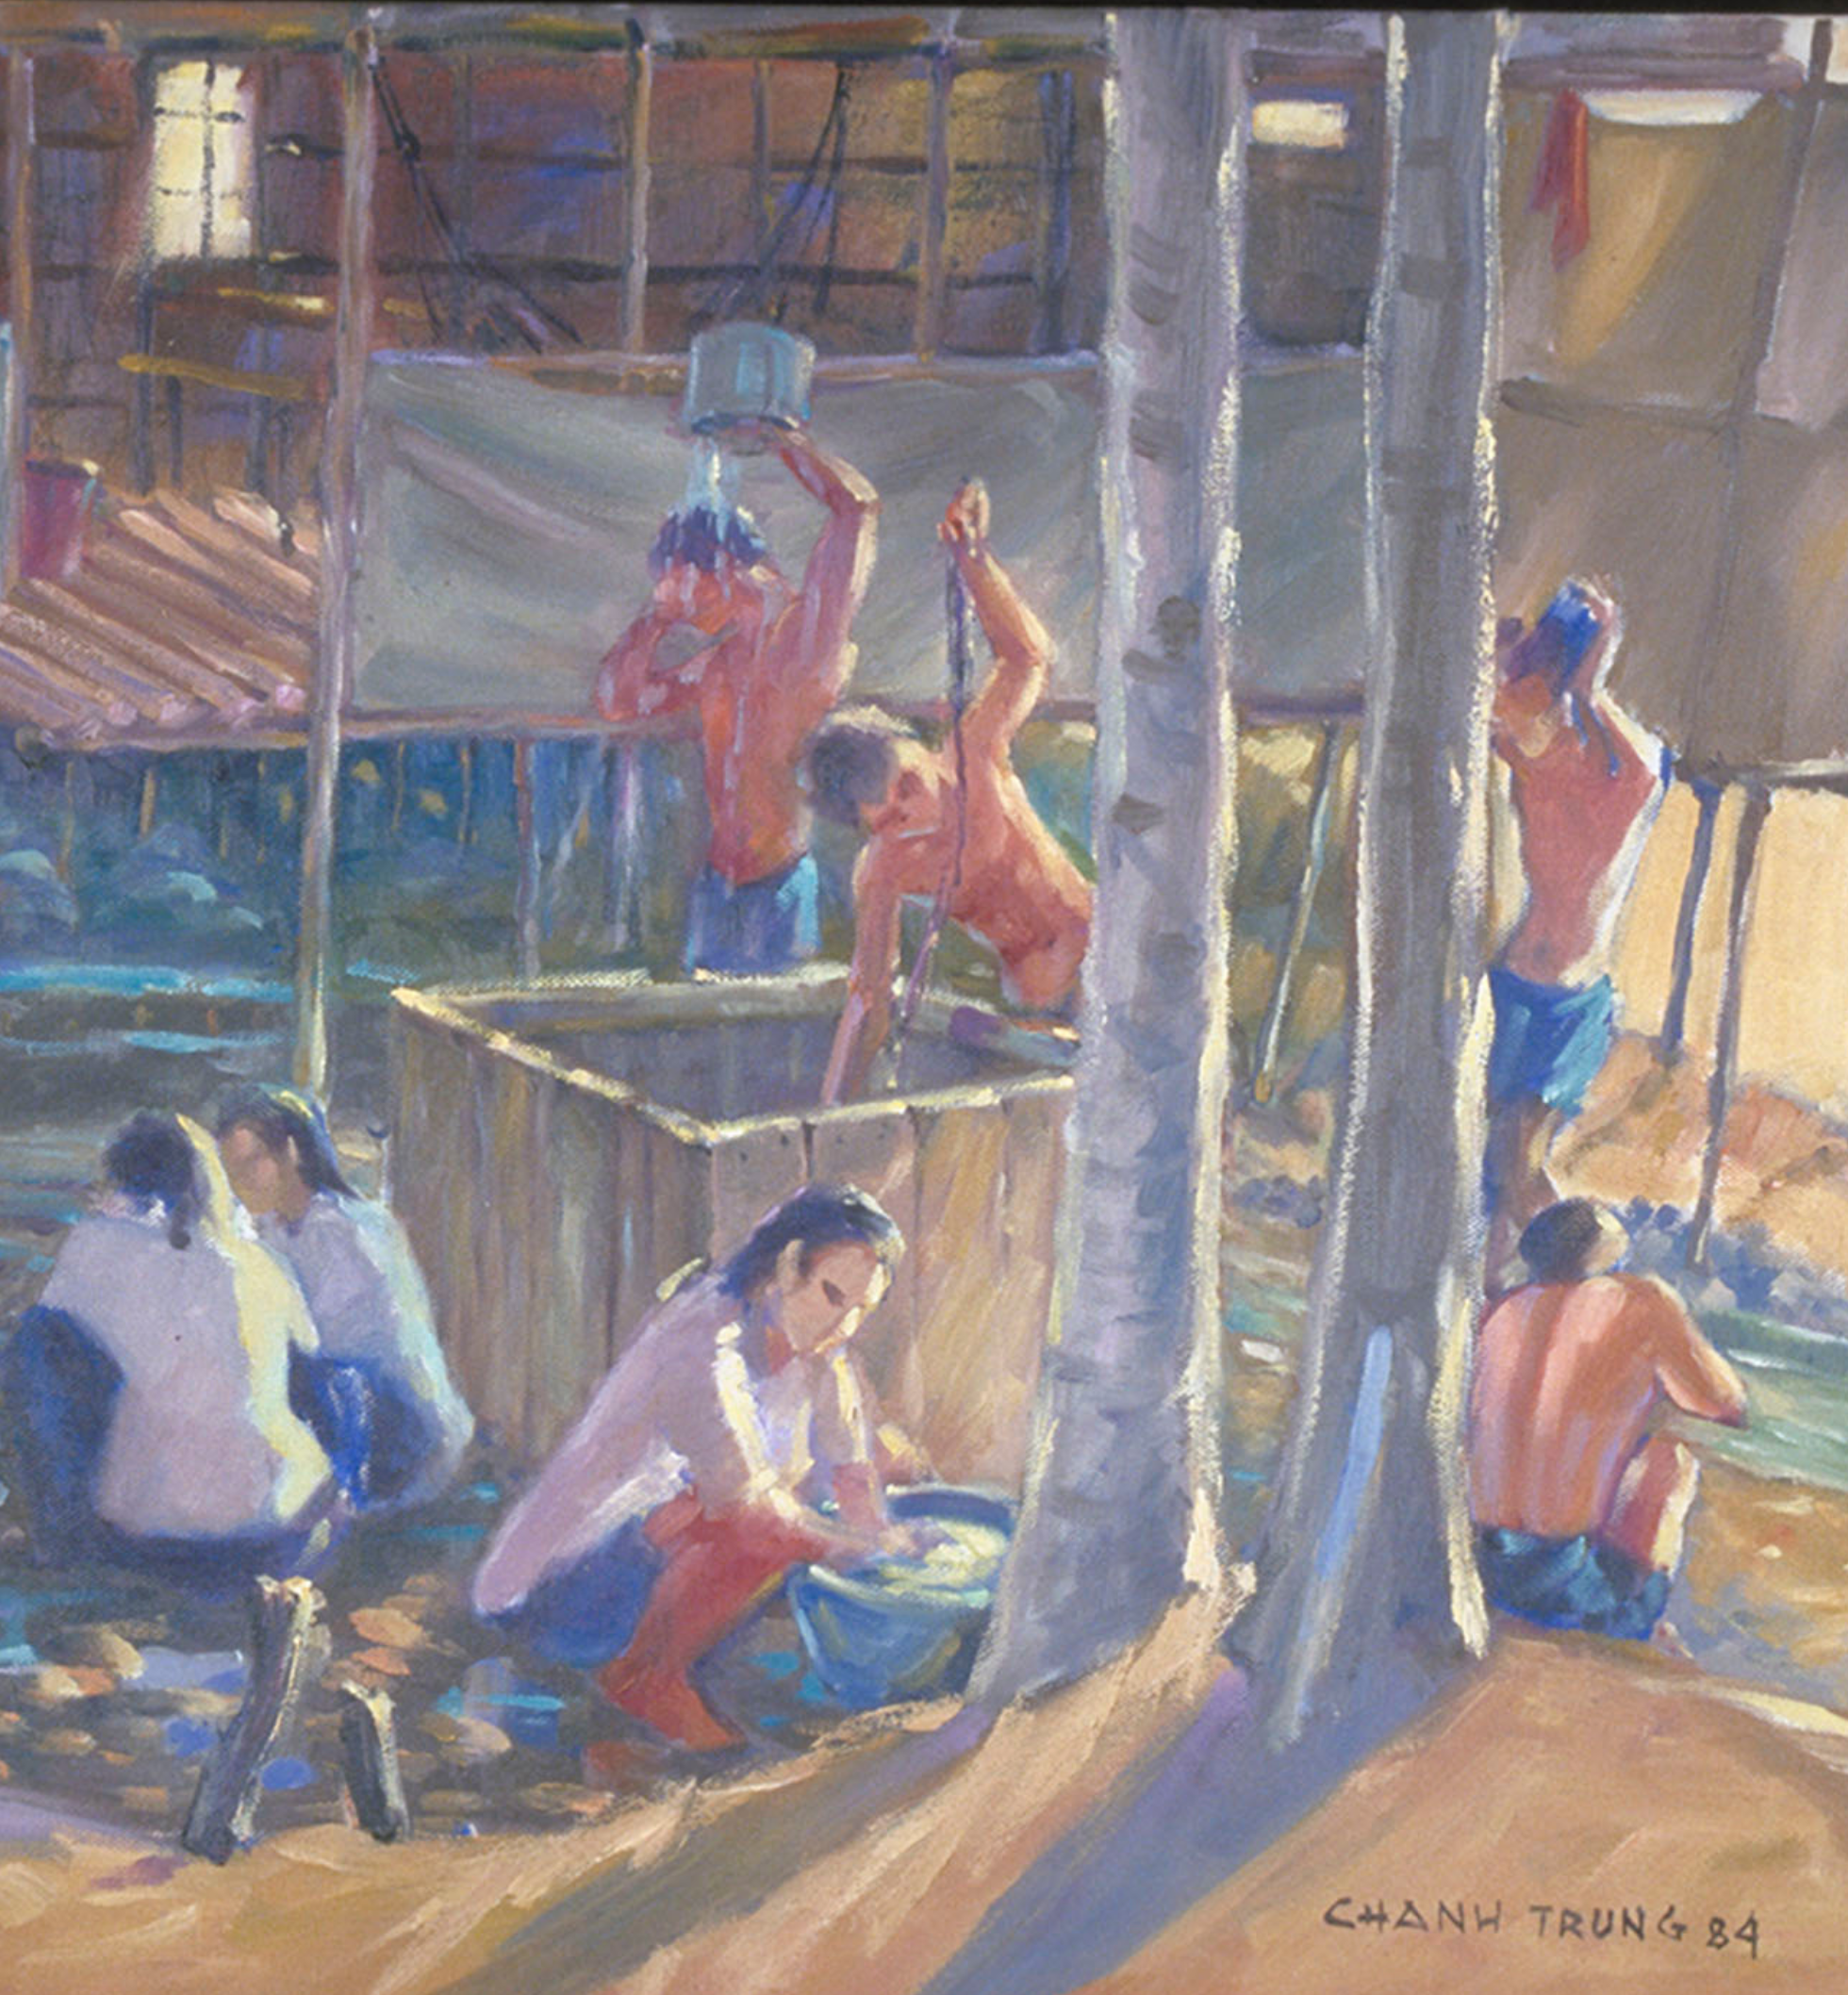 Painting by Truong Chanh Trung, 1984. CMH artifact number 91-449.